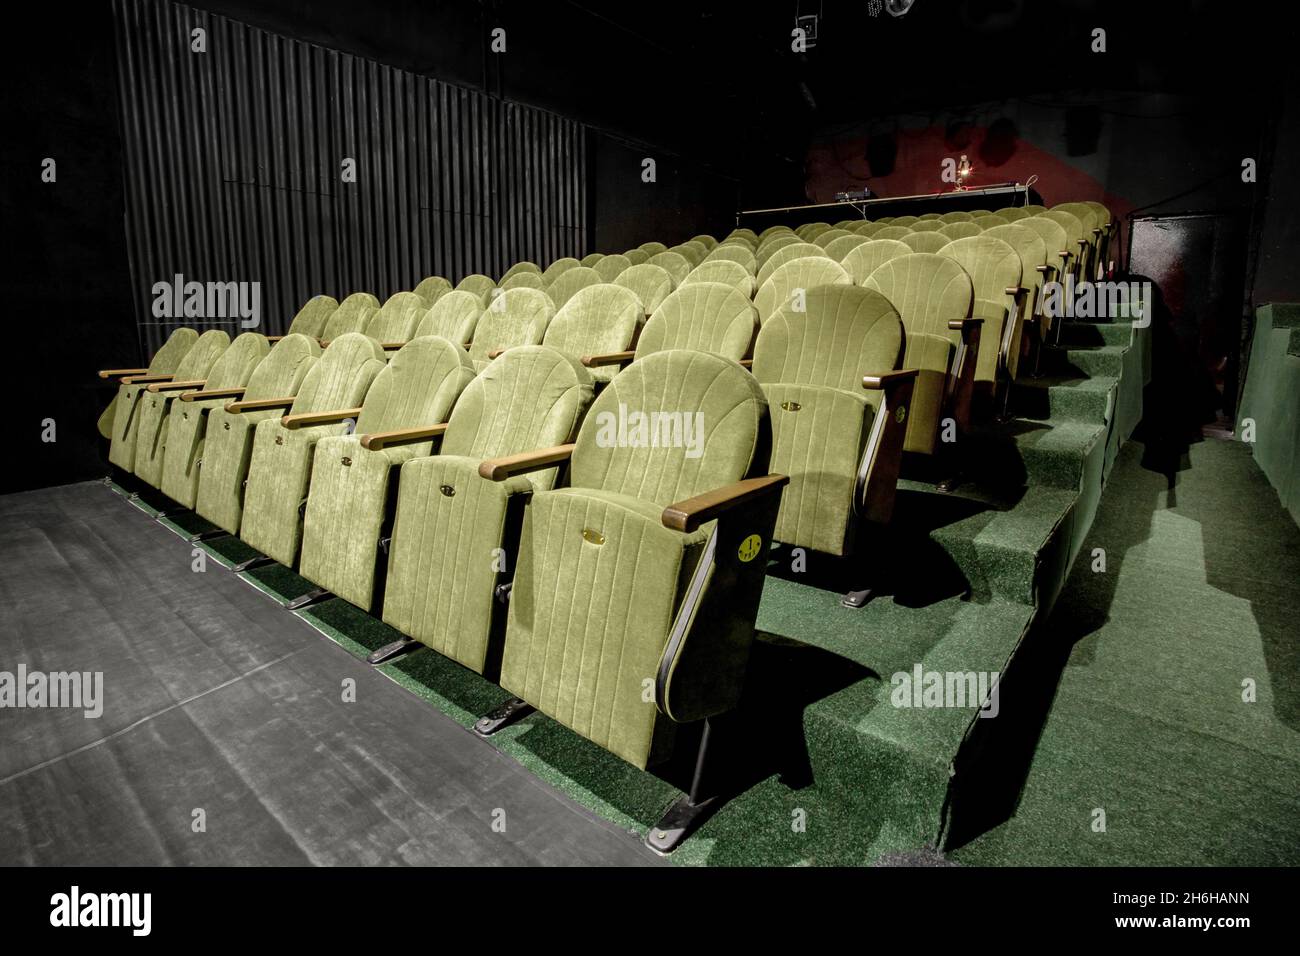 Image of a small auditorium with green armchairs Stock Photo